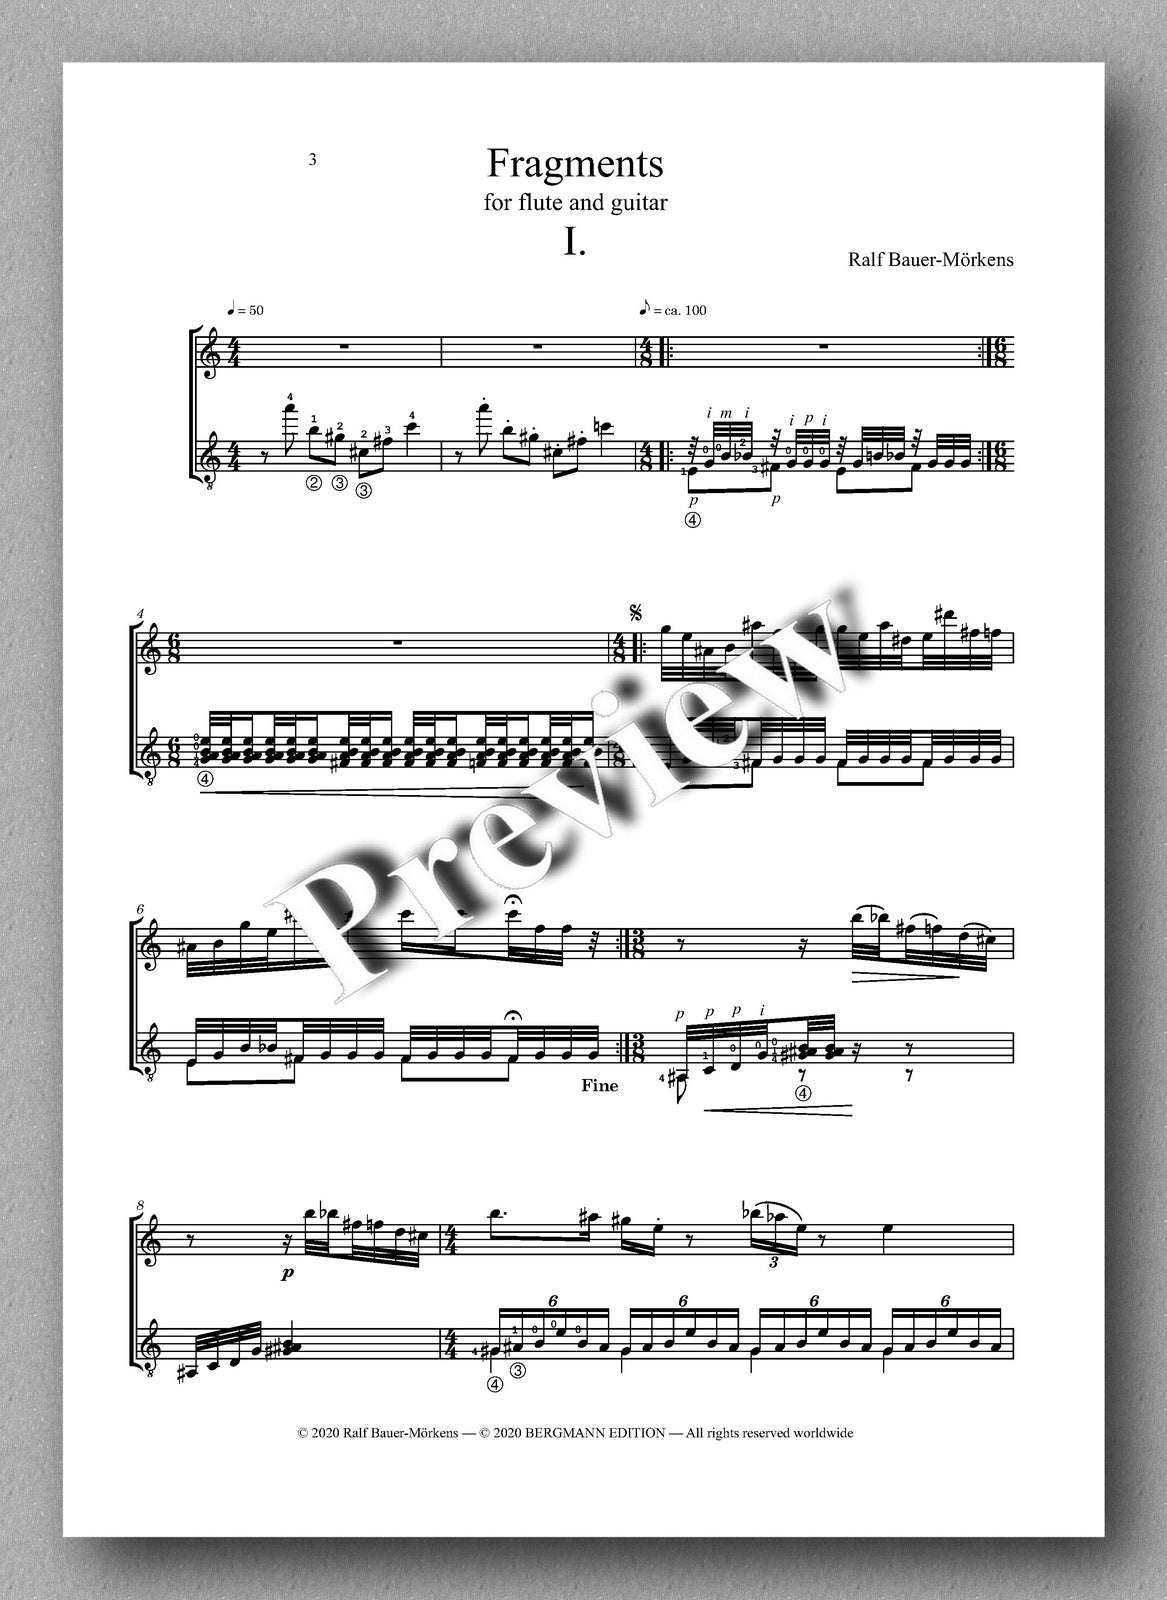 Fragments by Ralf Bauer-Mörkens - preview of the music score 1